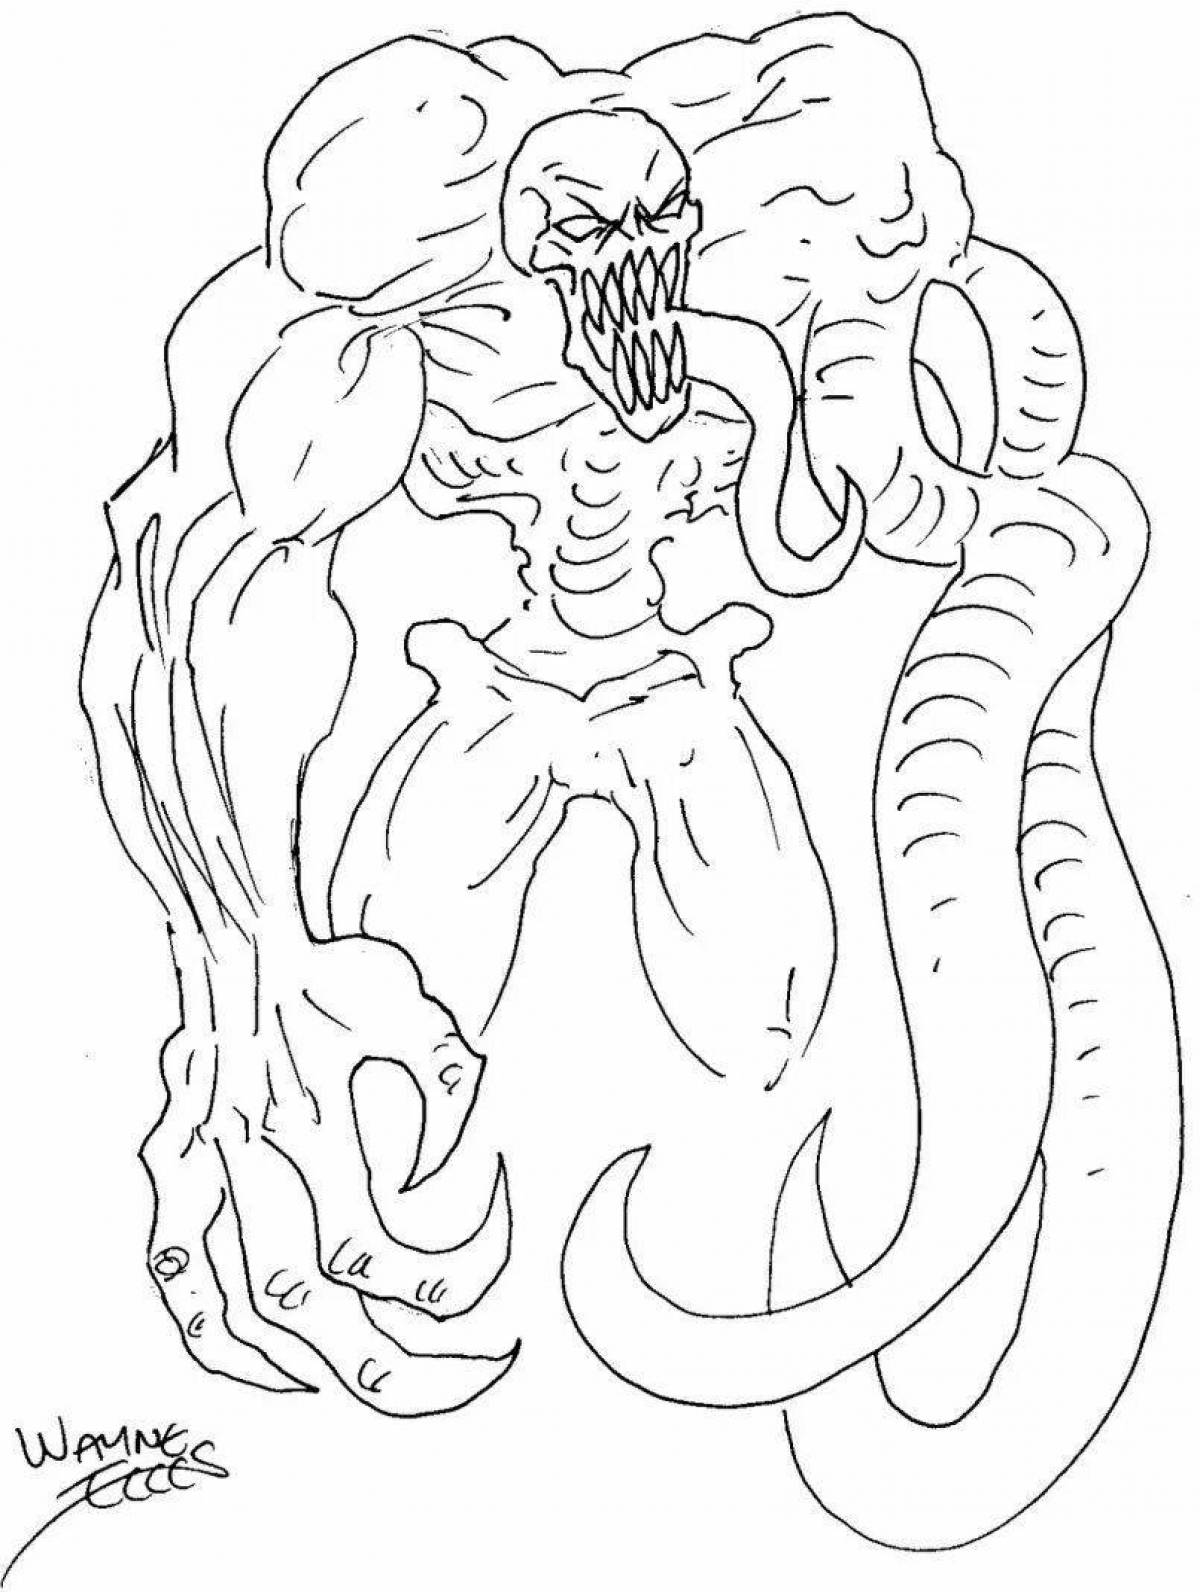 Coloring book terrifying scary monsters